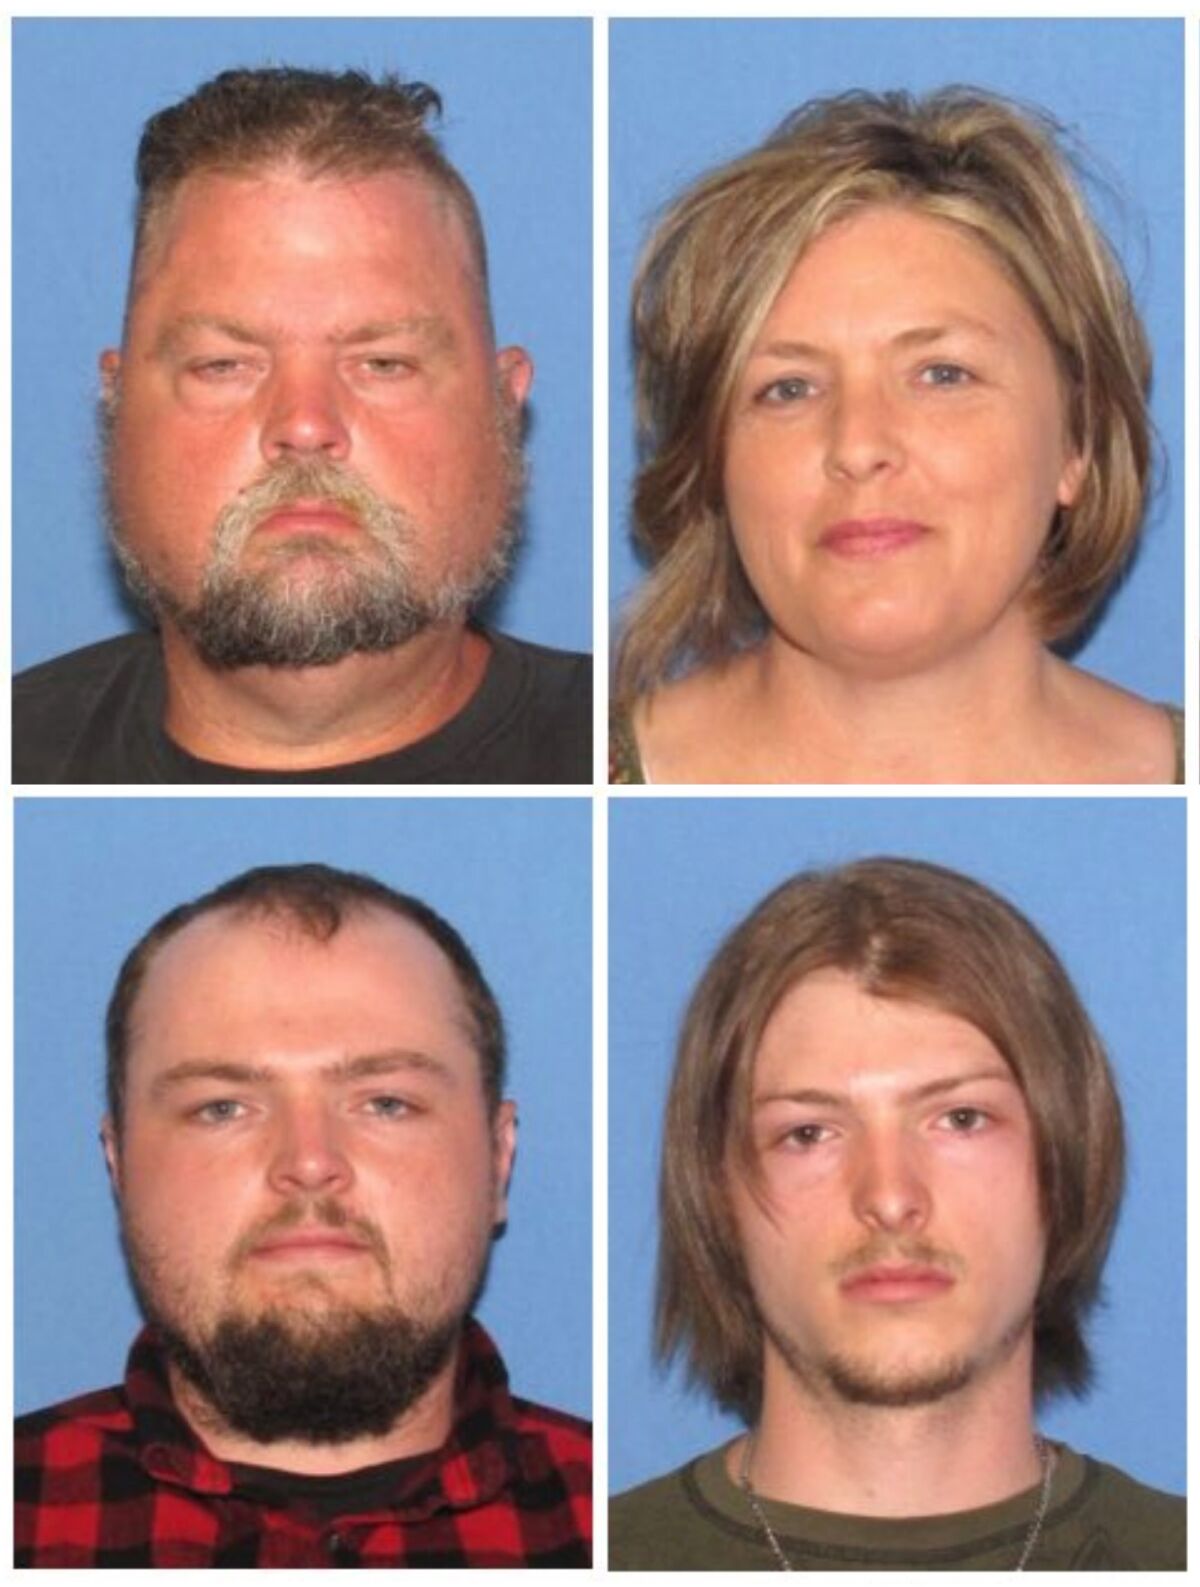 FILE - These undated file images released by the Ohio Attorney General's office, show, top row from left, George "Billy" Wagner III and Angela Wagner, and bottom row from left, George Wagner IV and Edward "Jake" Wagner. The four members of the Wagner family were charged in the 2016 slayings of eight members of the Rhoden family in rural Ohio. Tony Rhoden Sr., a man who lost several relatives in the mass slaying, has filed a wrongful death lawsuit against the four suspects in the killings. (Ohio Attorney General's office via AP, File)